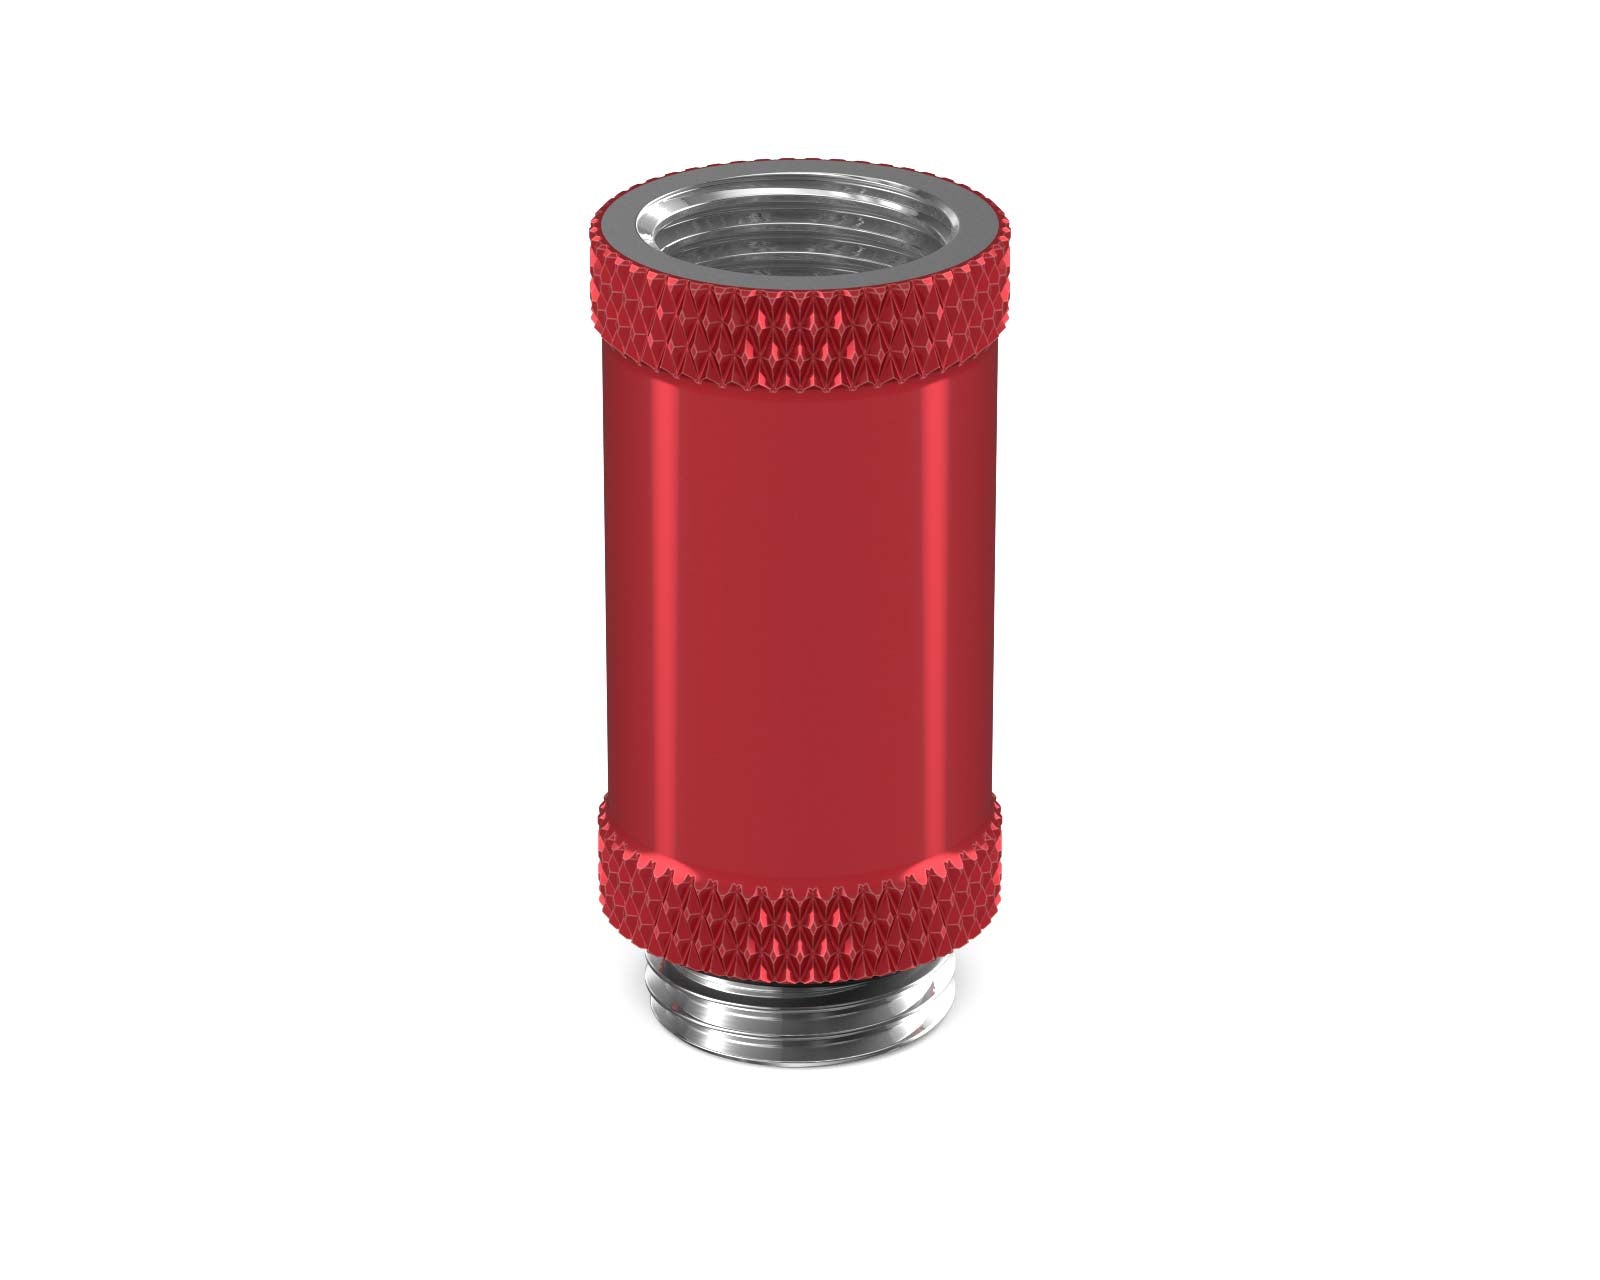 PrimoChill Male to Female G 1/4in. 30mm SX Extension Coupler - PrimoChill - KEEPING IT COOL Candy Red